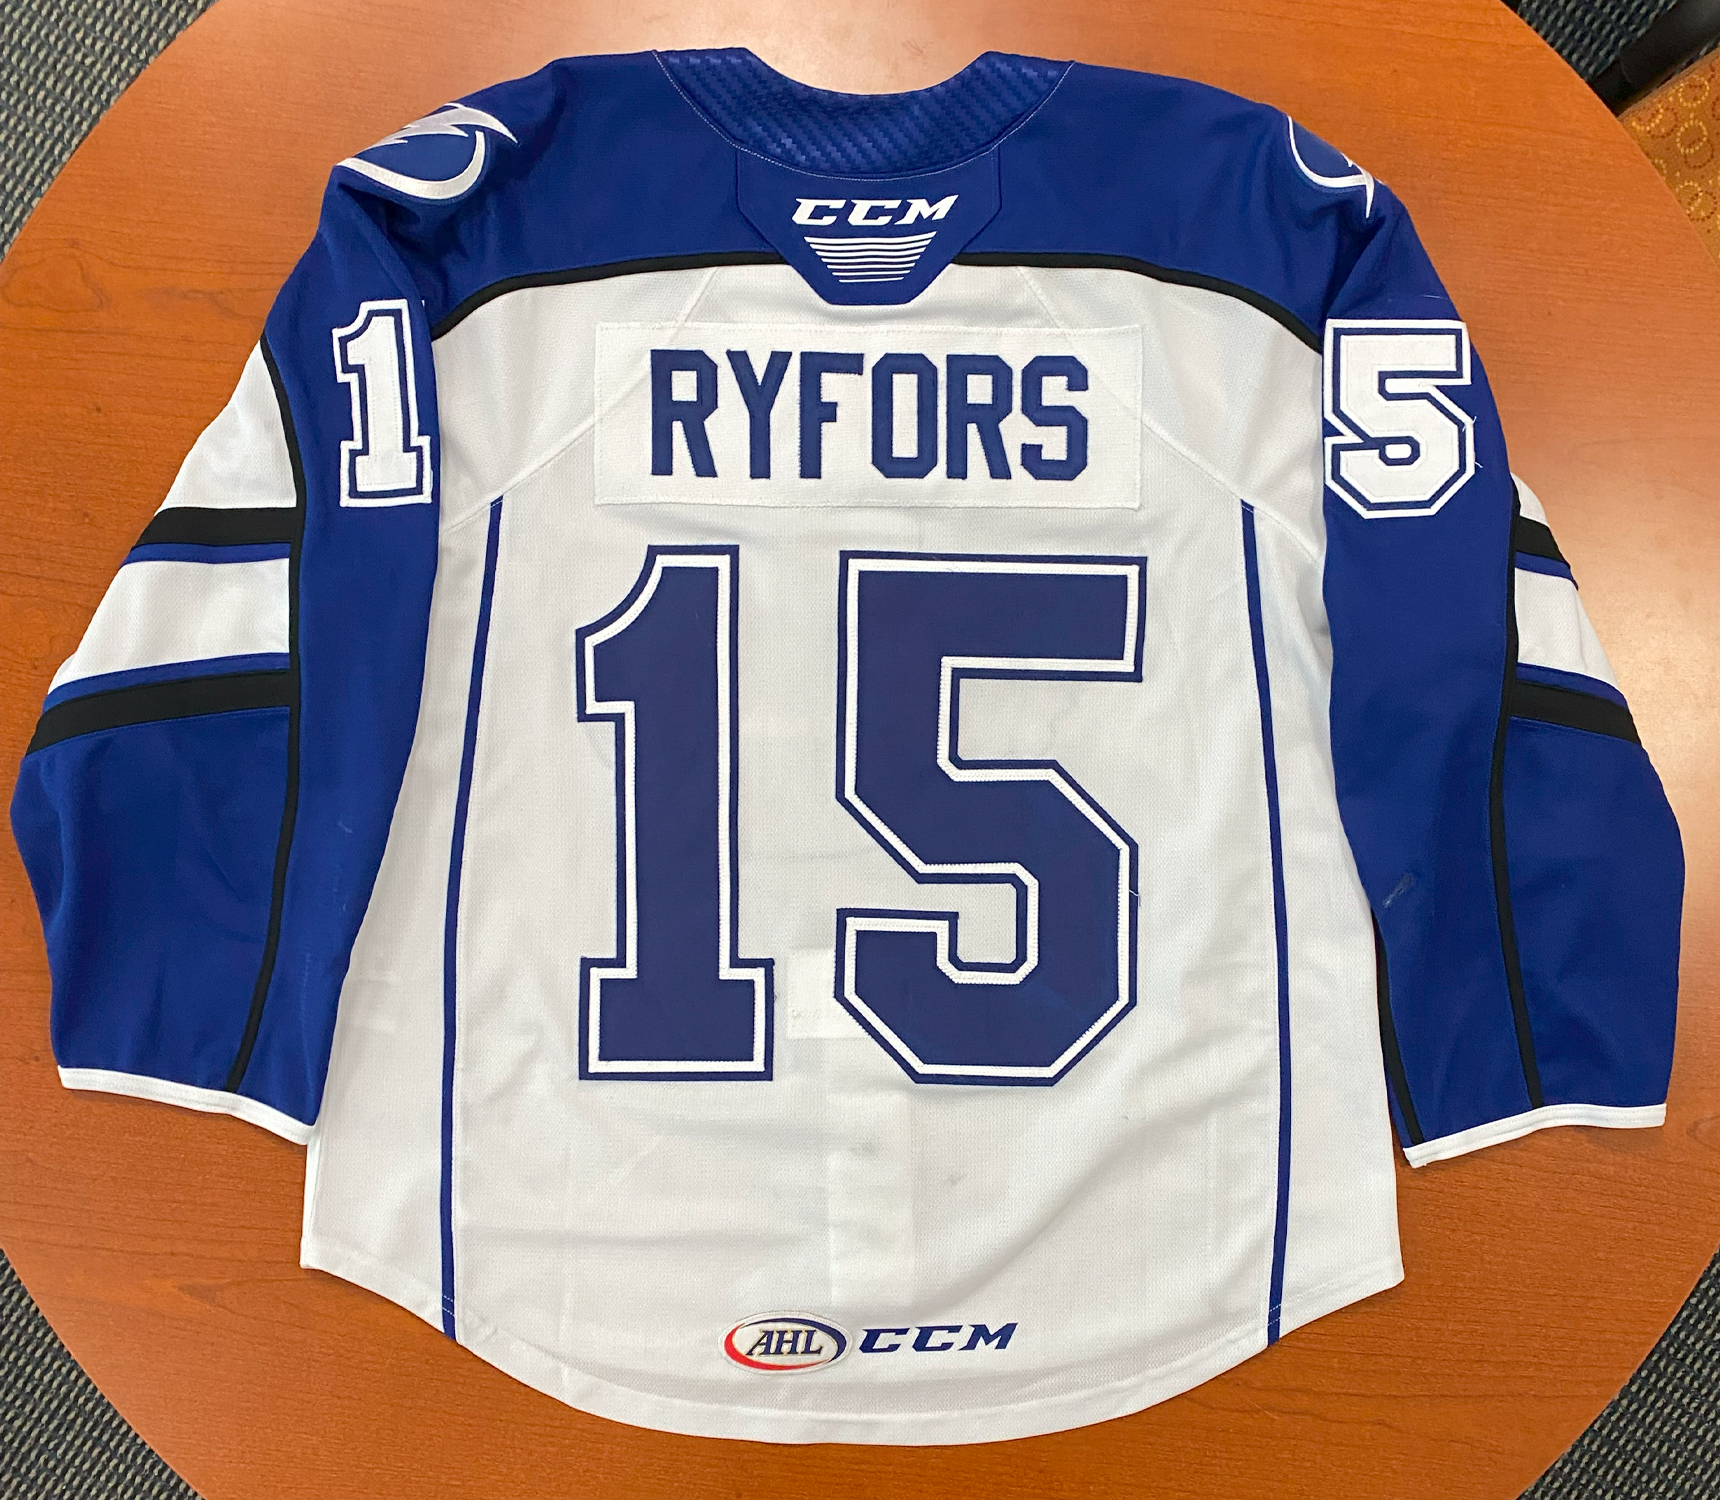 15 Simon Ryfors White Jersey - 2022-23 – Syracuse Crunch Official